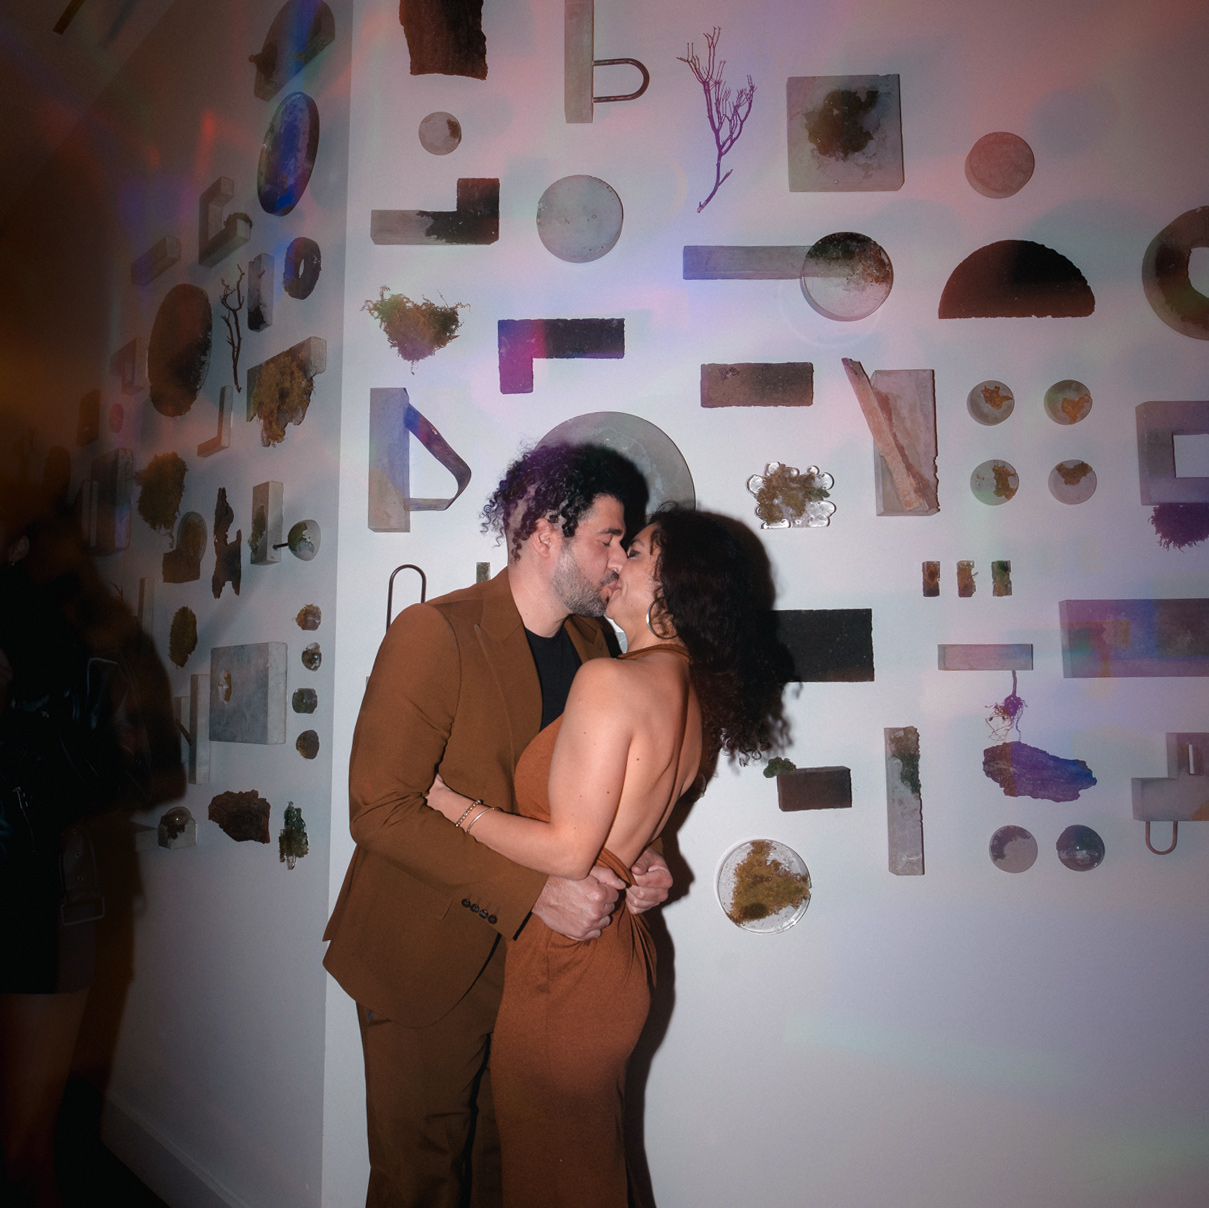 Two people kissing in front of an art installation wall